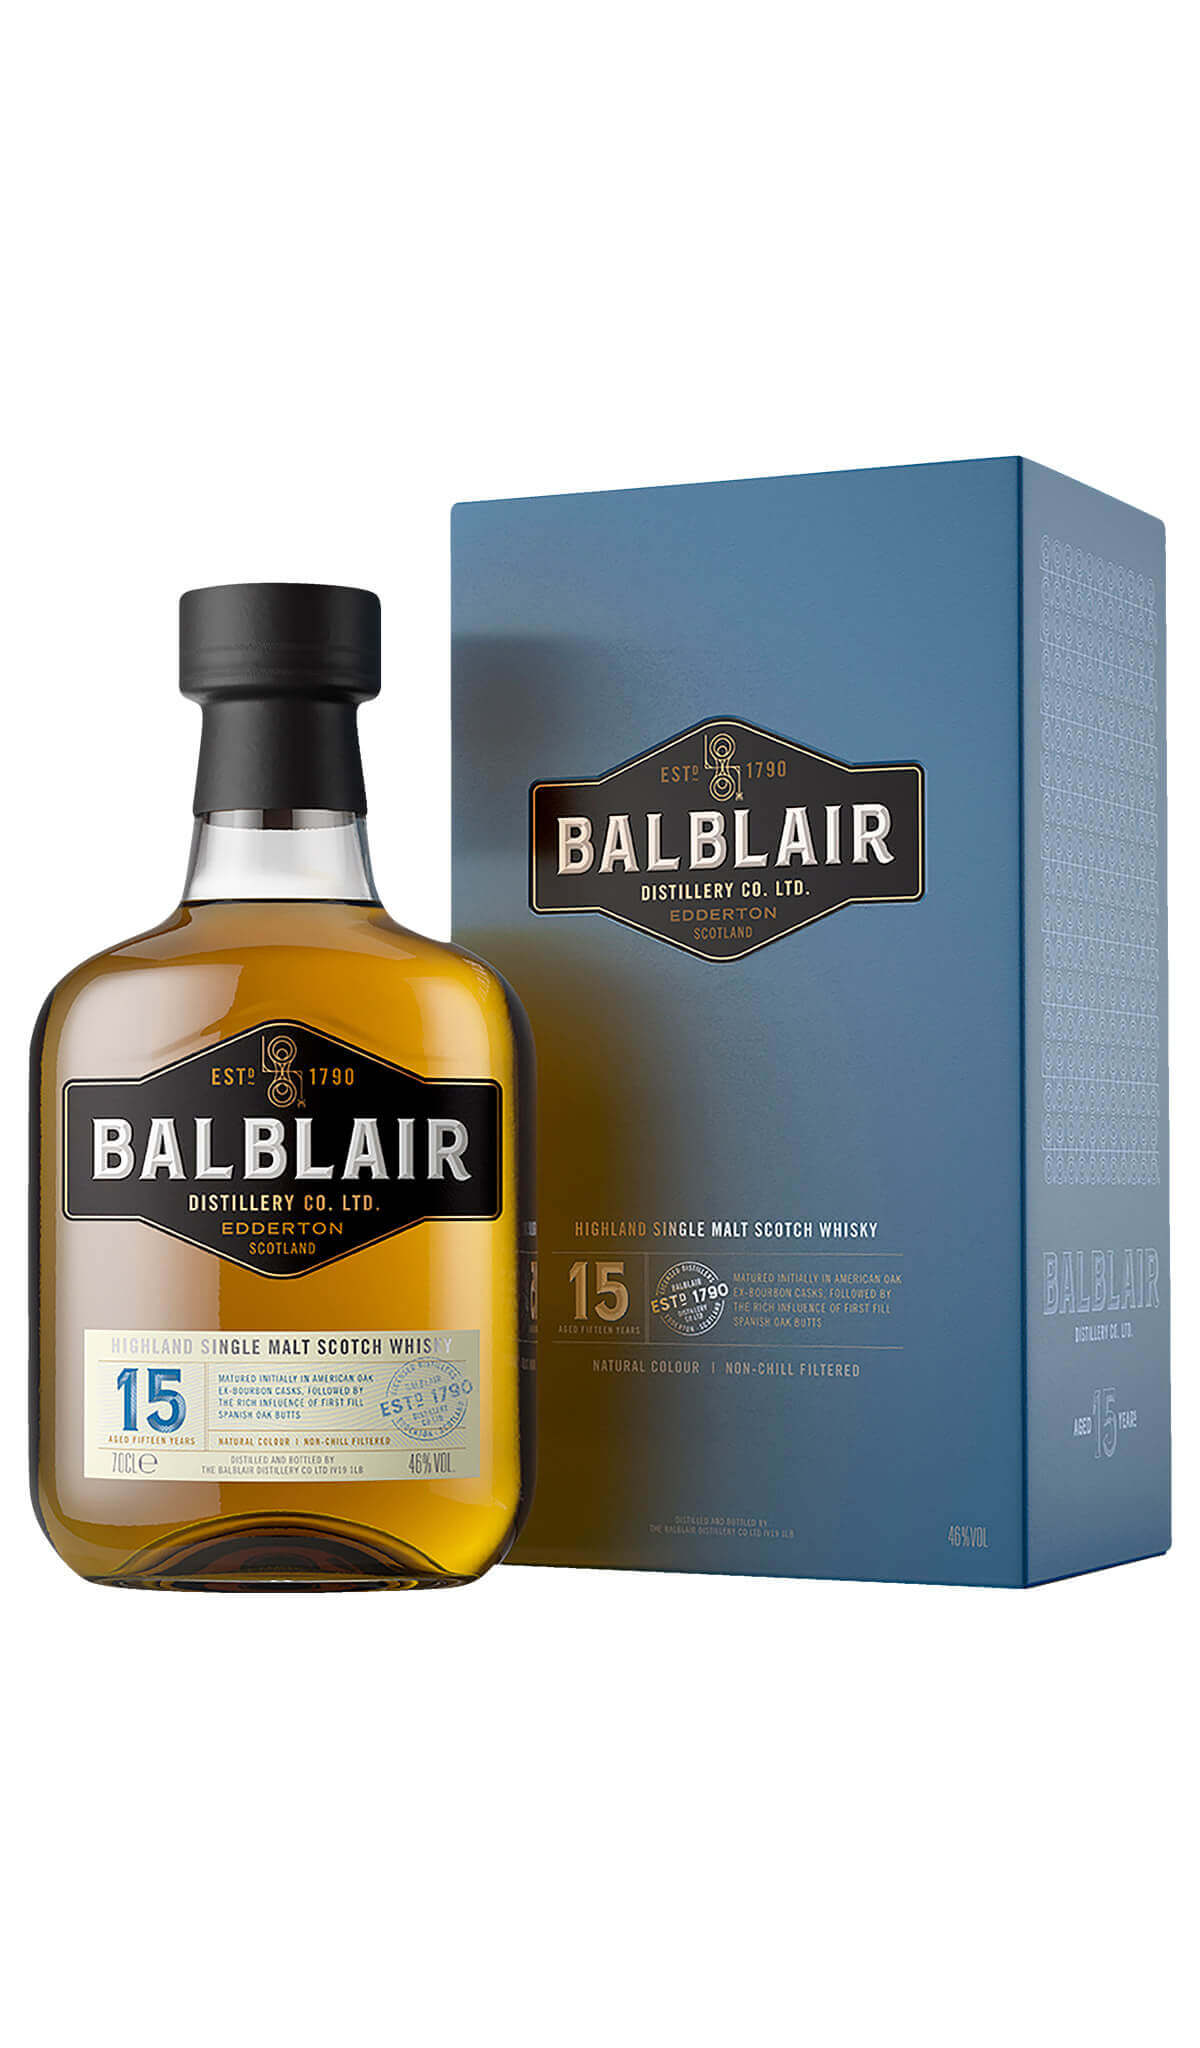 Find out more, explore the range and purchase Balblair Highland 15 Year Old Single Malt Scotch Whisky 700mL available online at Wine Sellers Direct - Australia's independent liquor specialists.